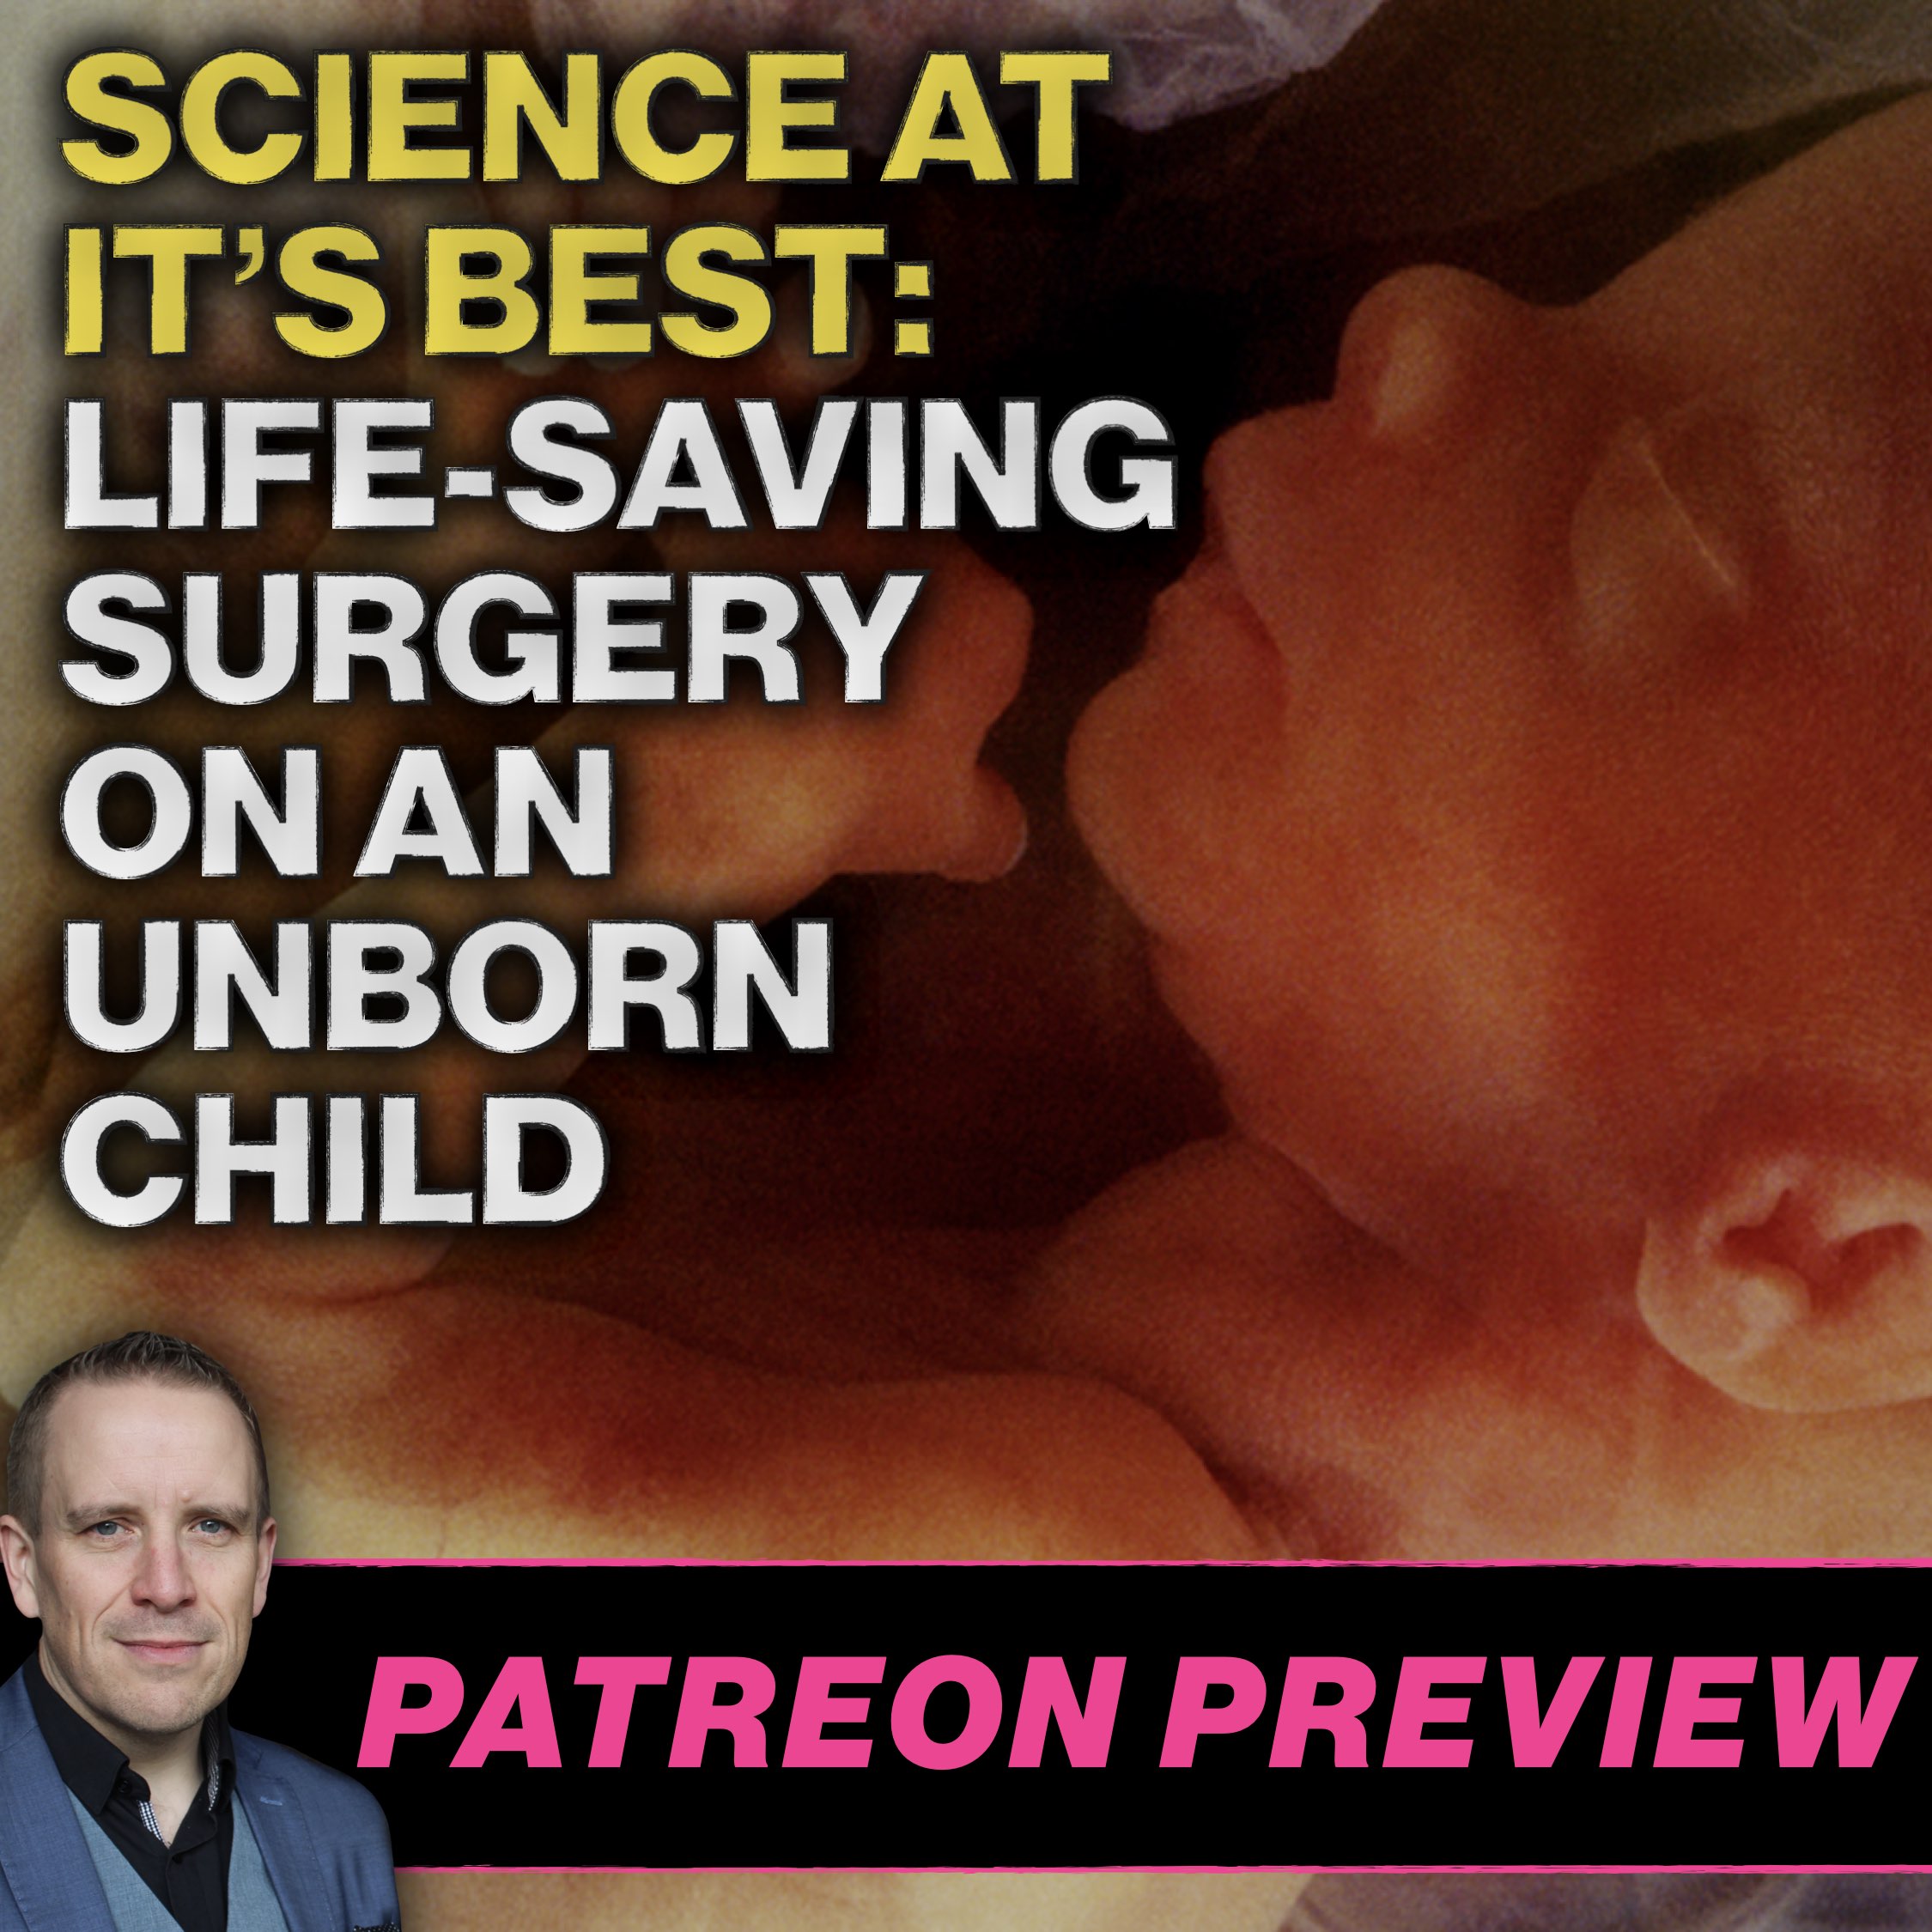 Science at its Best: Life-Saving Brain Surgery on an Unborn Child (Patreon Preview)